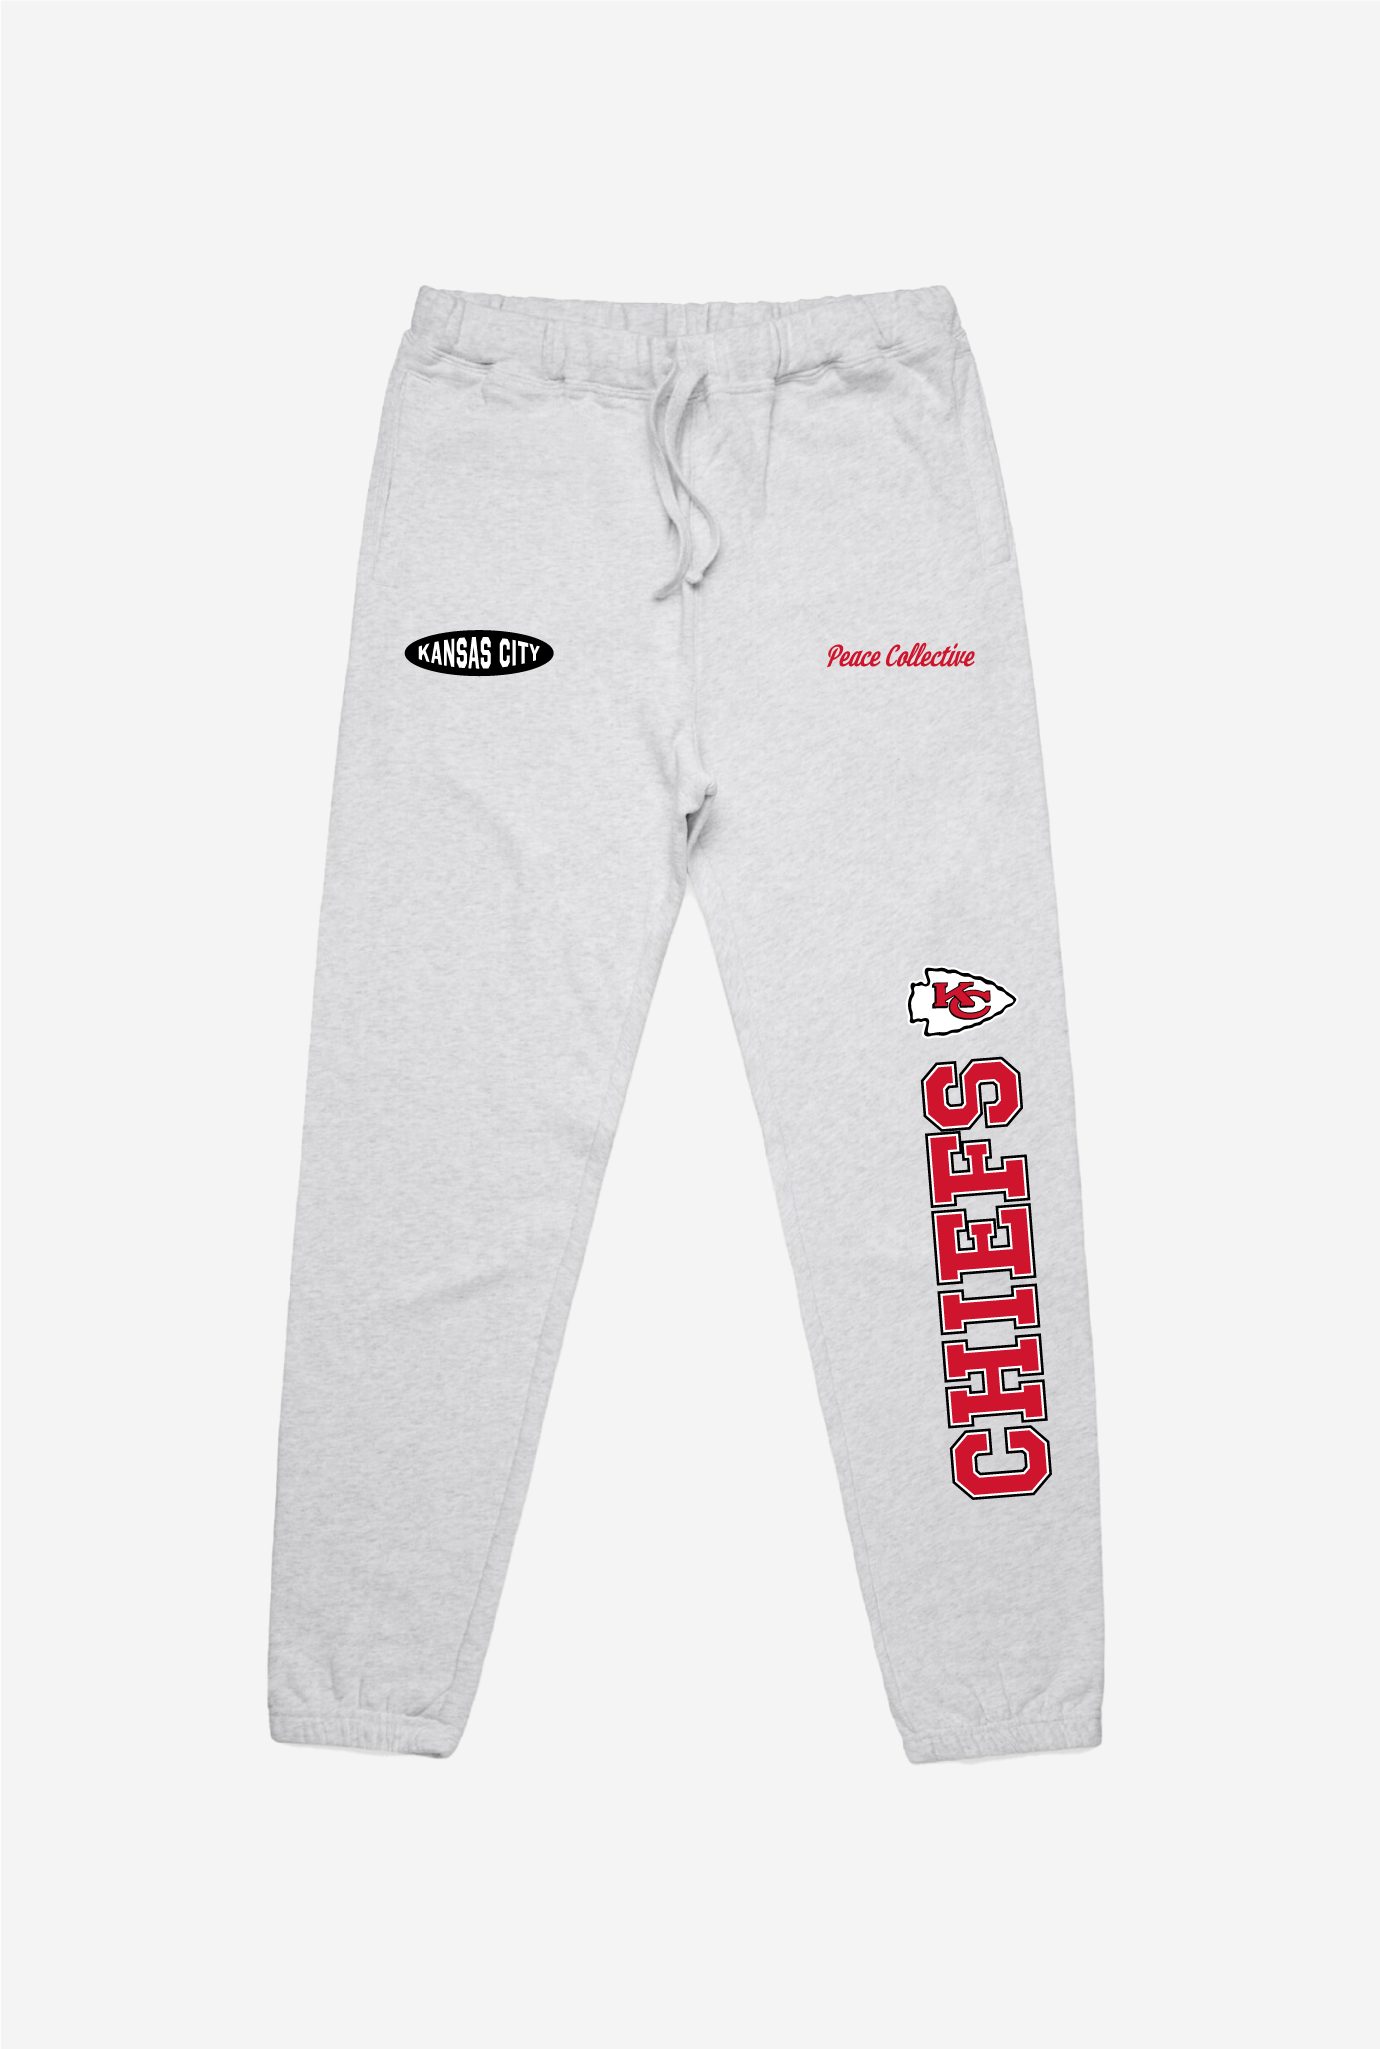 Kansas City Chiefs Washed Graphic Joggers - Ash